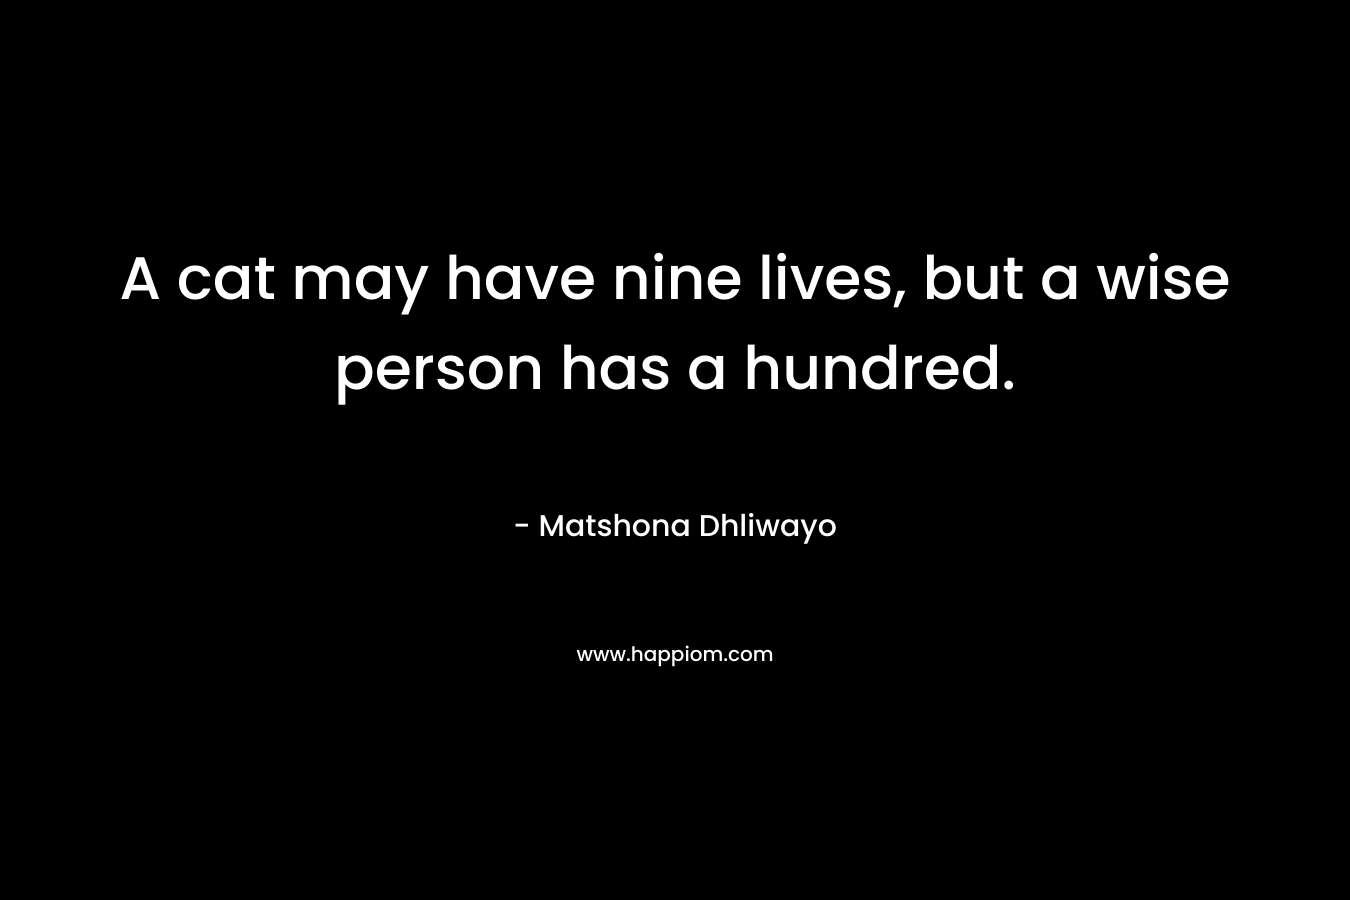 A cat may have nine lives, but a wise person has a hundred.